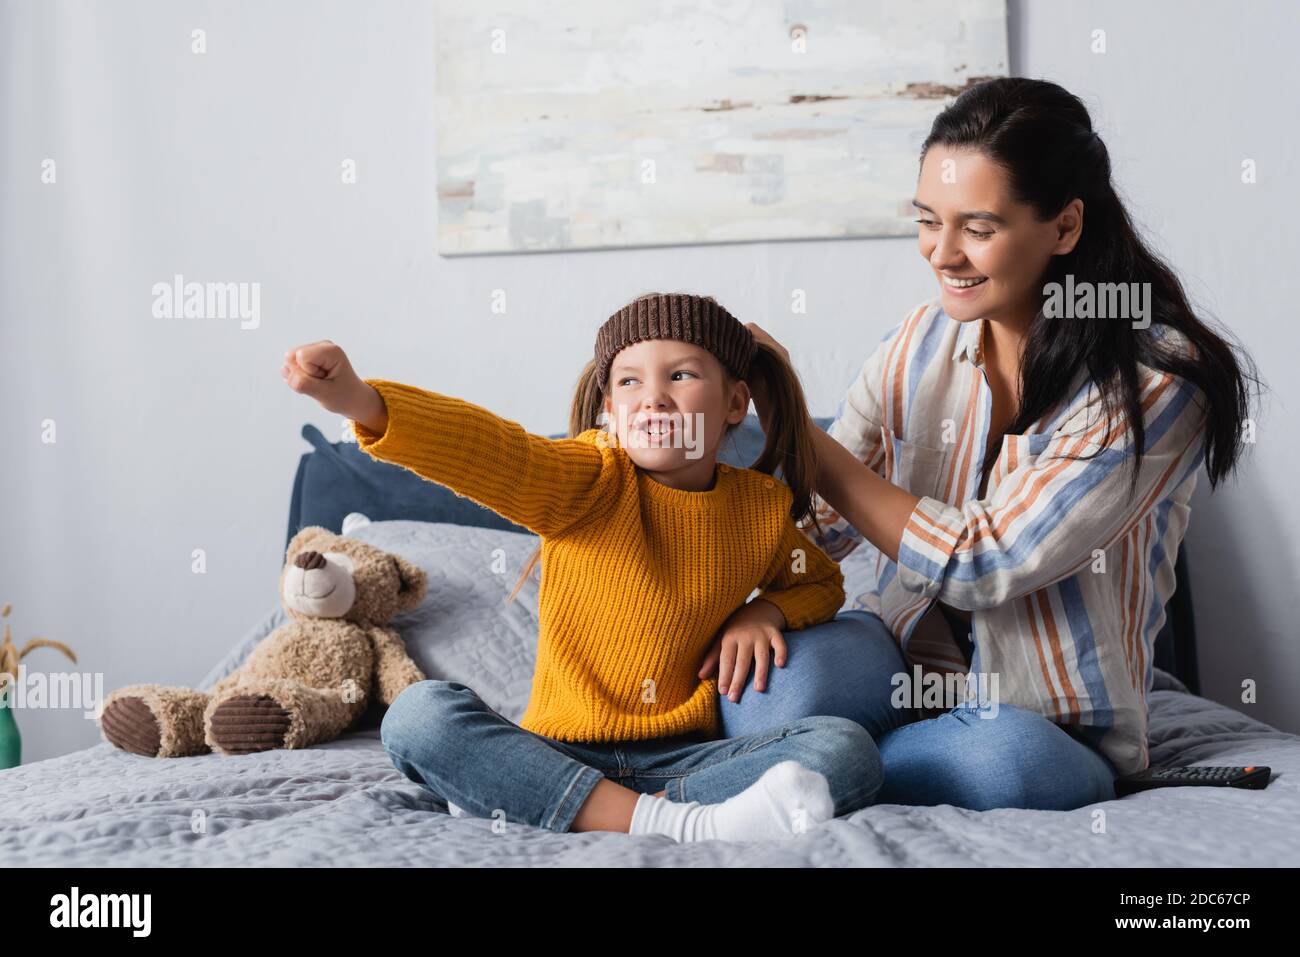 excited girl in headband grimacing with outstretched hand near smiling mother Stock Photo